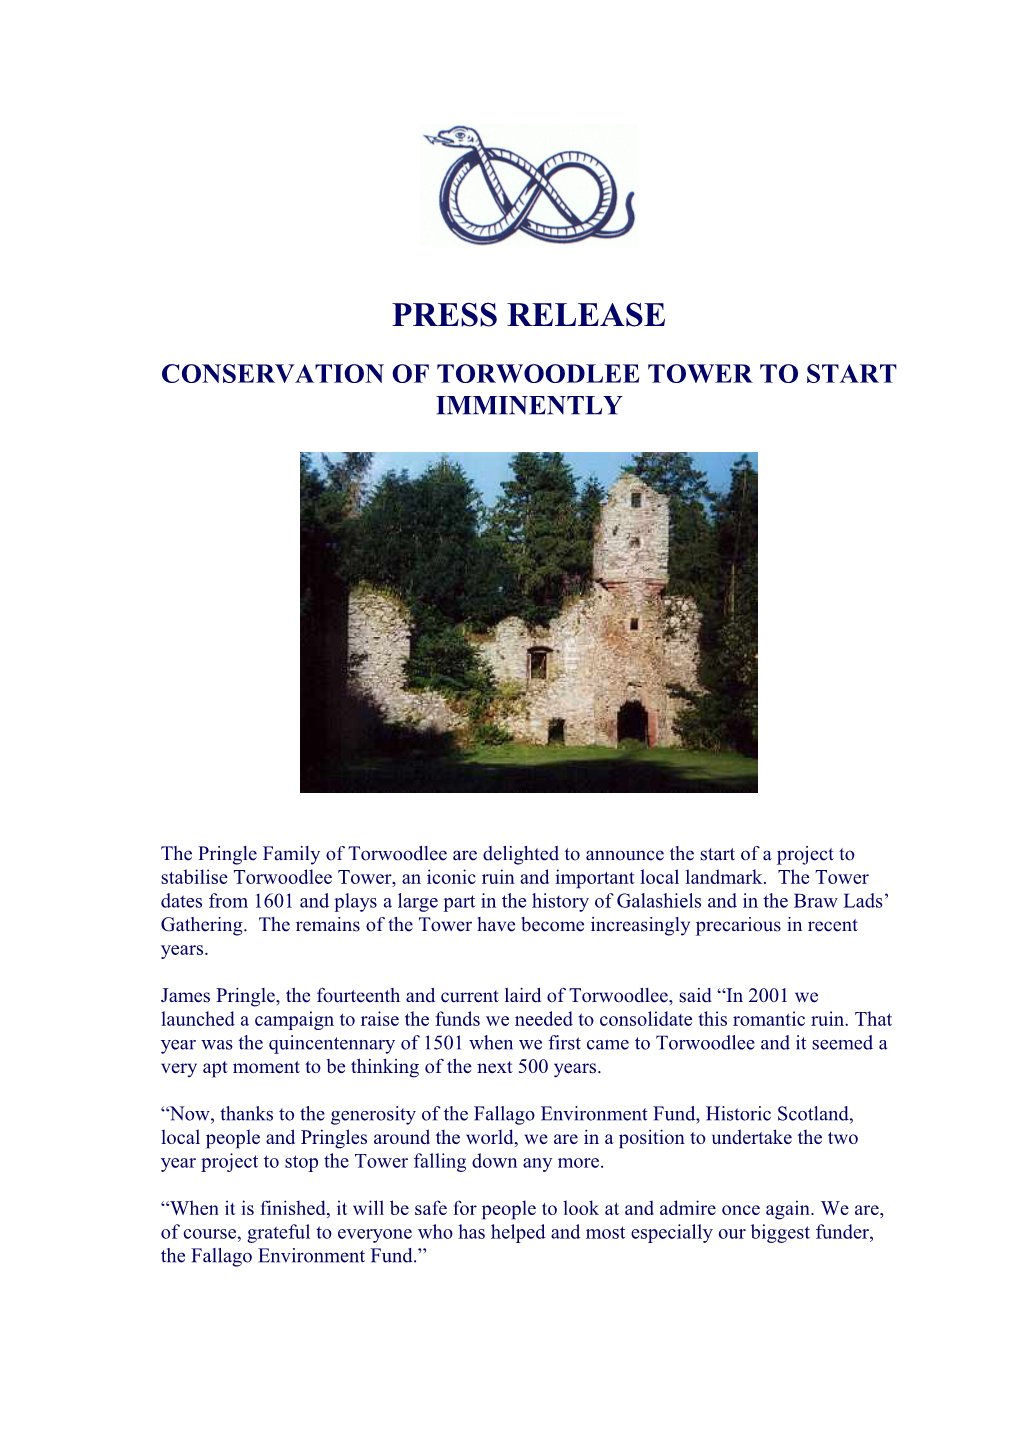 Conservation of Torwoodlee Tower to Start Imminently